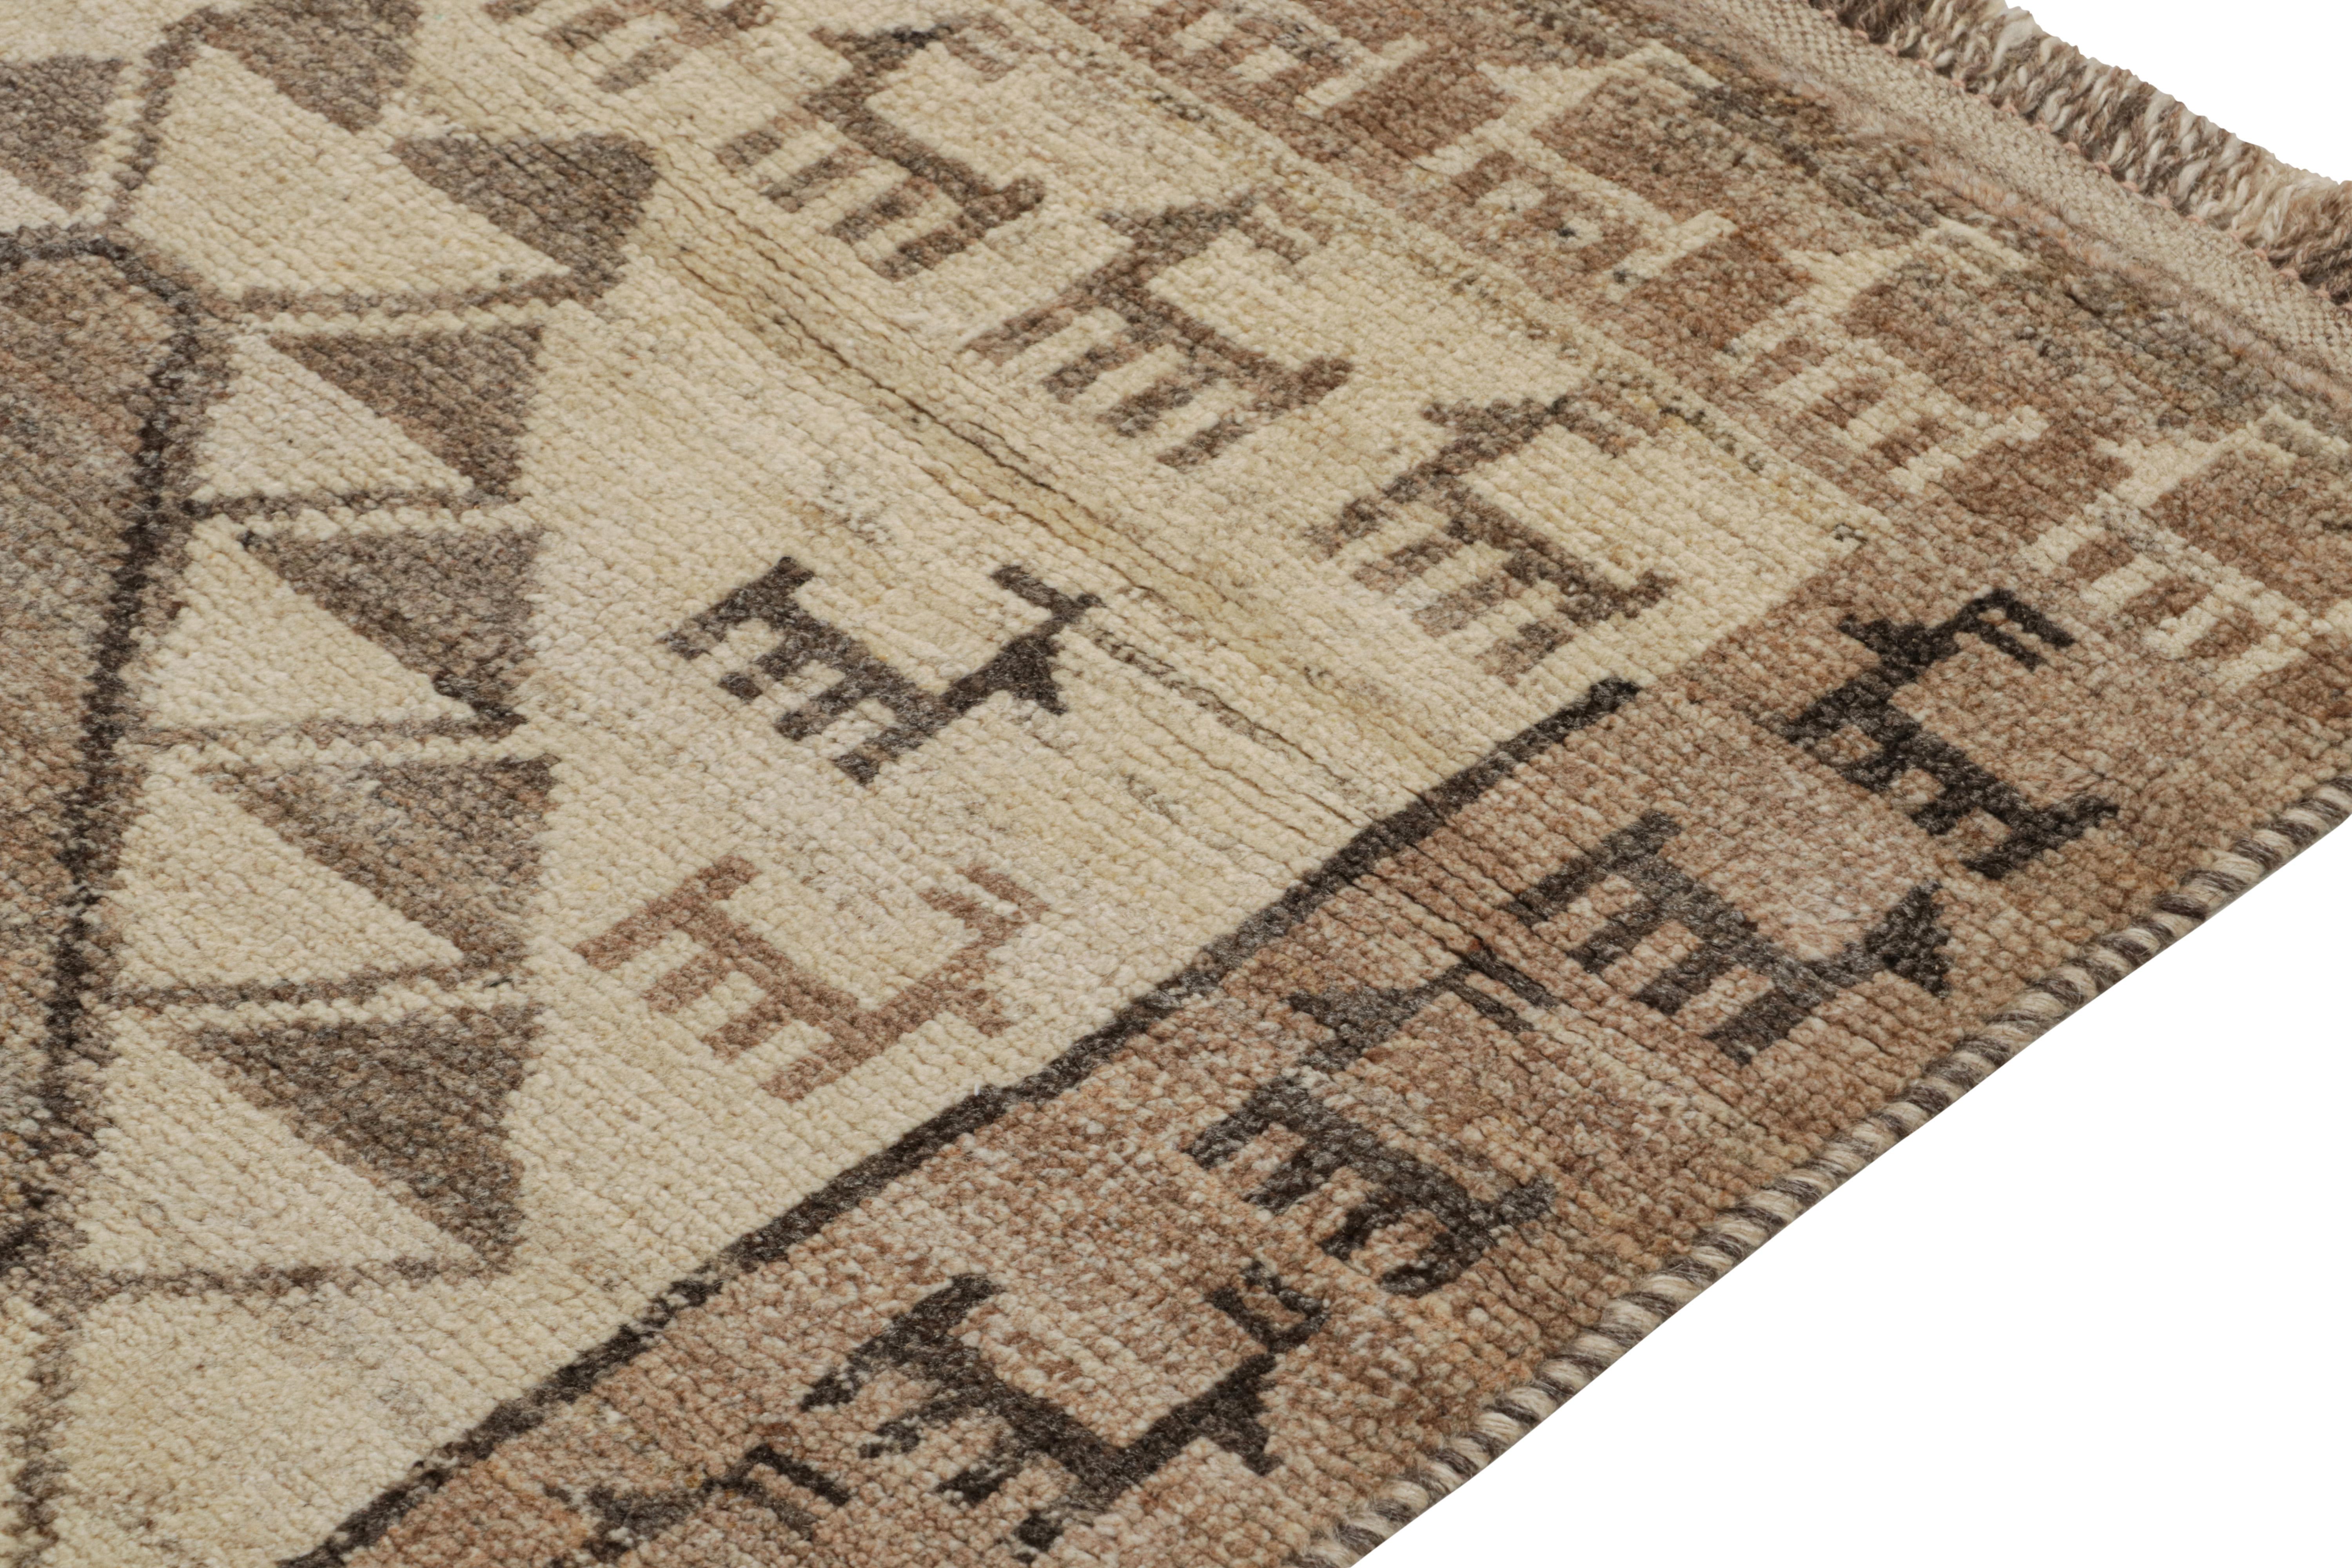 Vintage Gabbeh Tribal Runner in Grey and Brown Pictorial Patterns by Rug & Kilim In Good Condition For Sale In Long Island City, NY